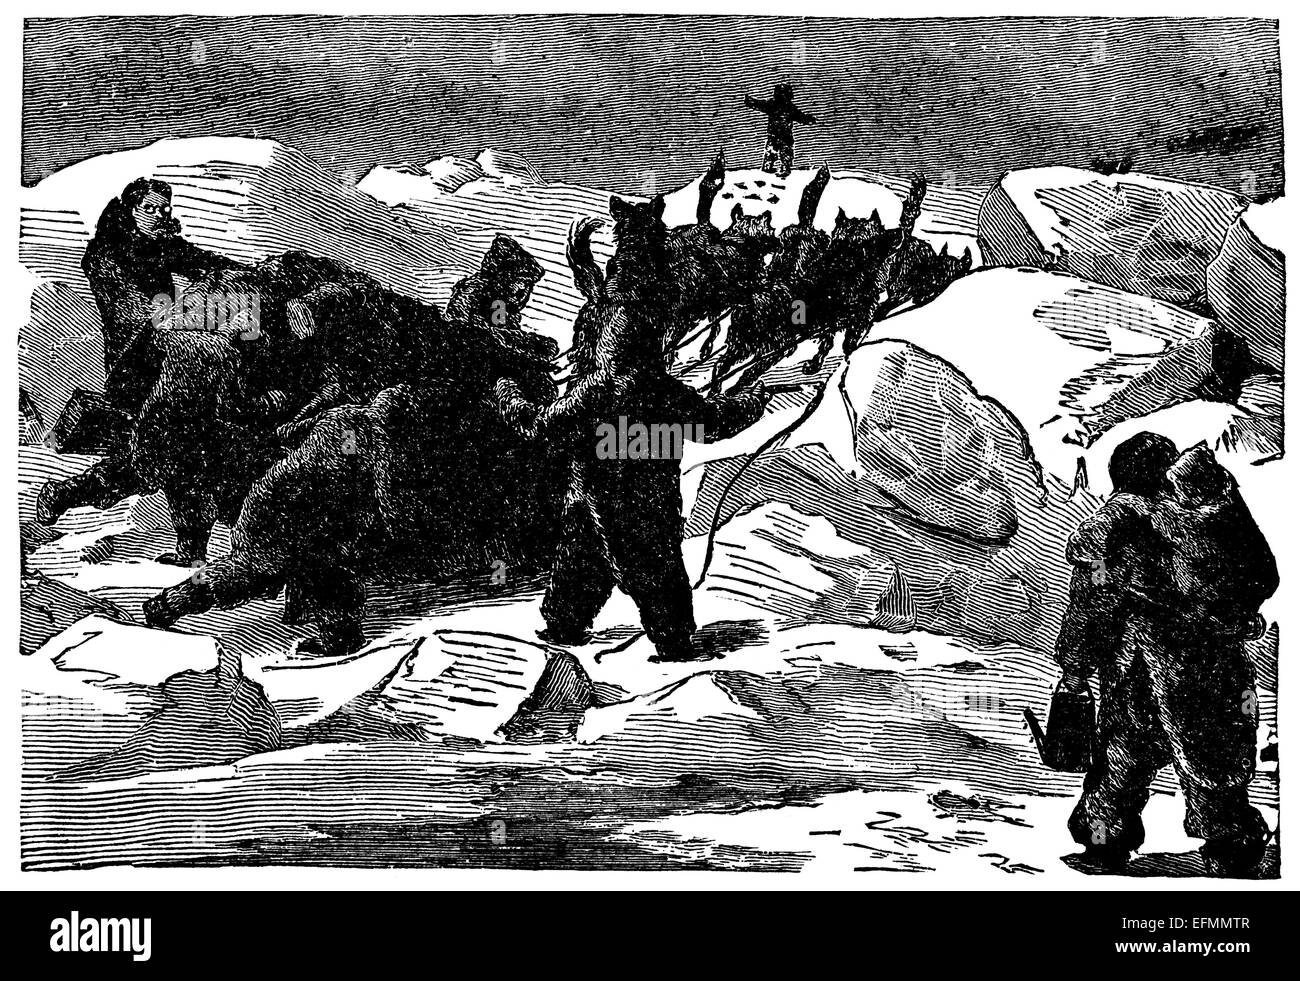 19th century engraving of explorers and a dogsled team on the ice in the arctic Stock Photo